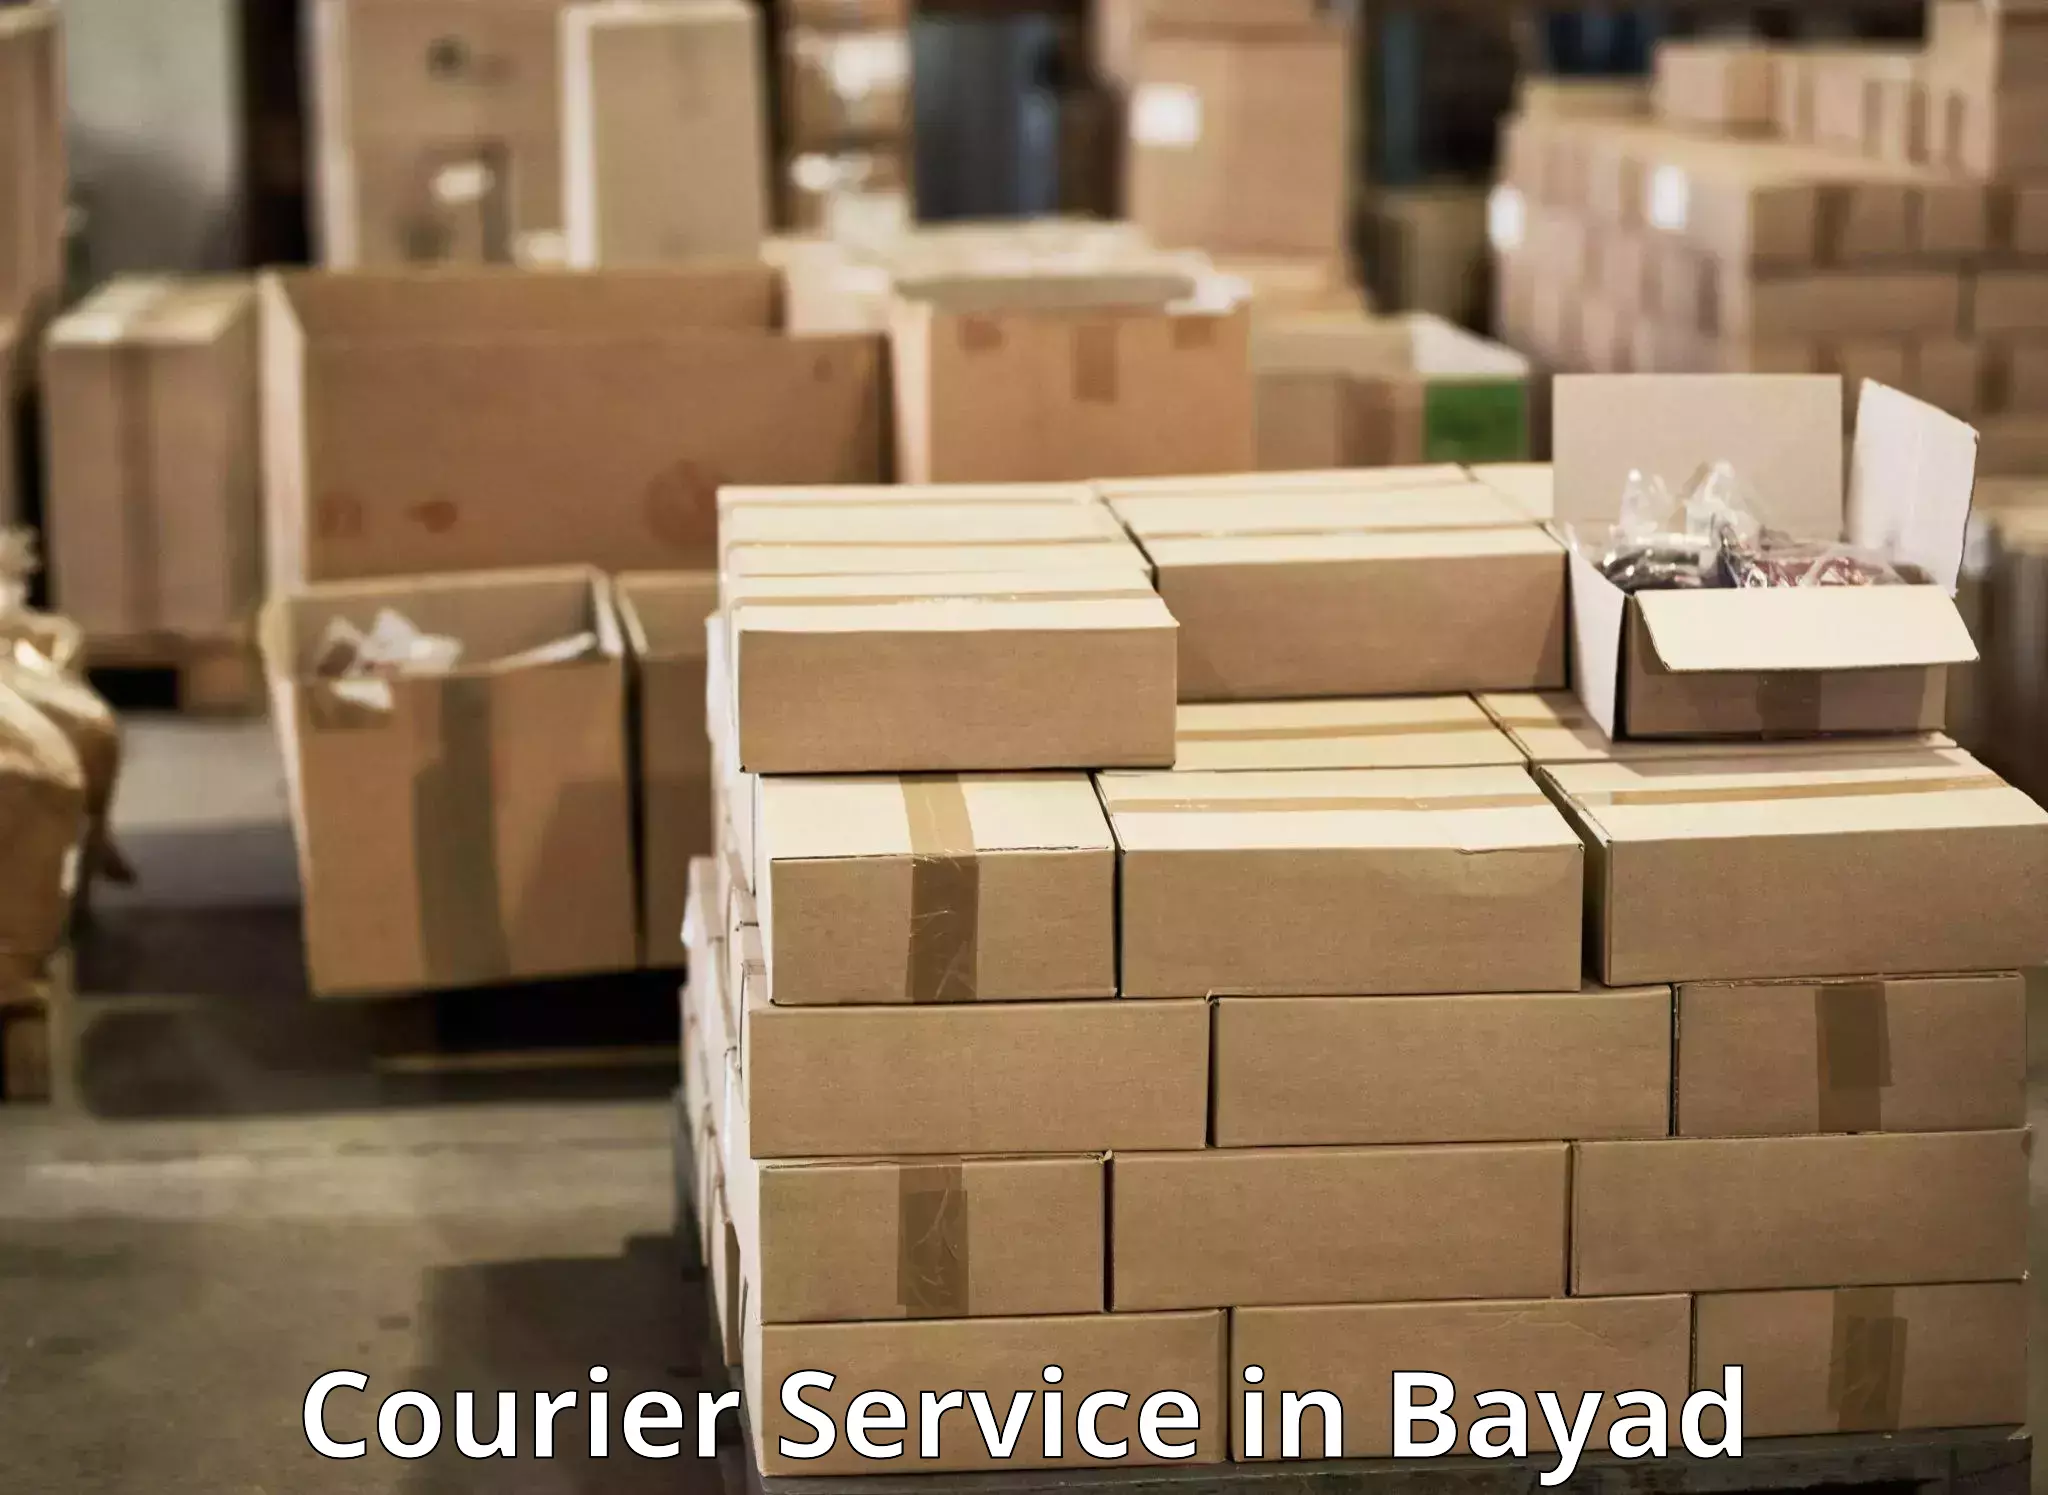 High-capacity courier solutions in Bayad